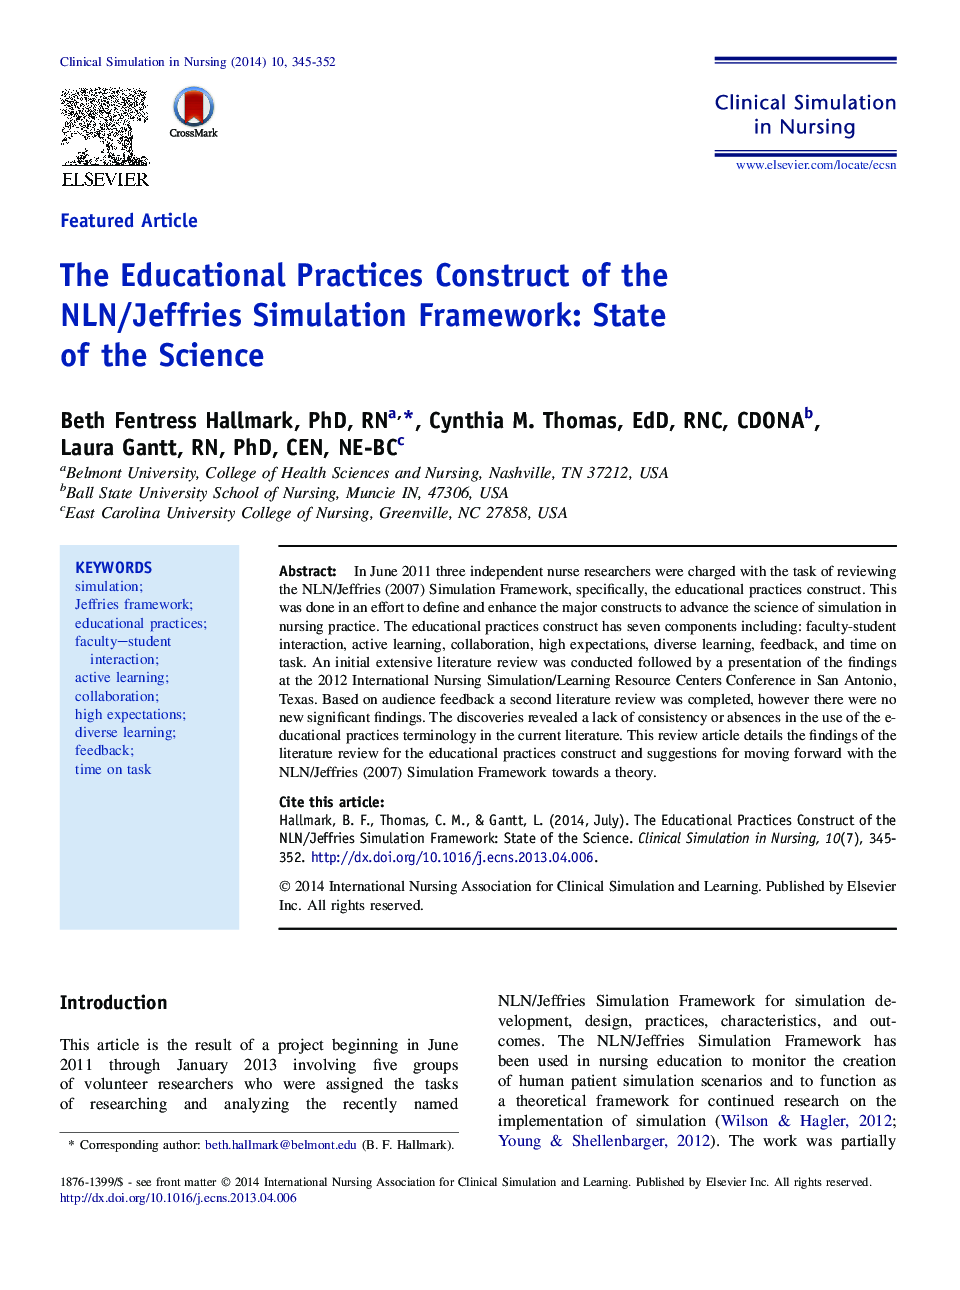 The Educational Practices Construct of the NLN/Jeffries Simulation Framework: State of the Science